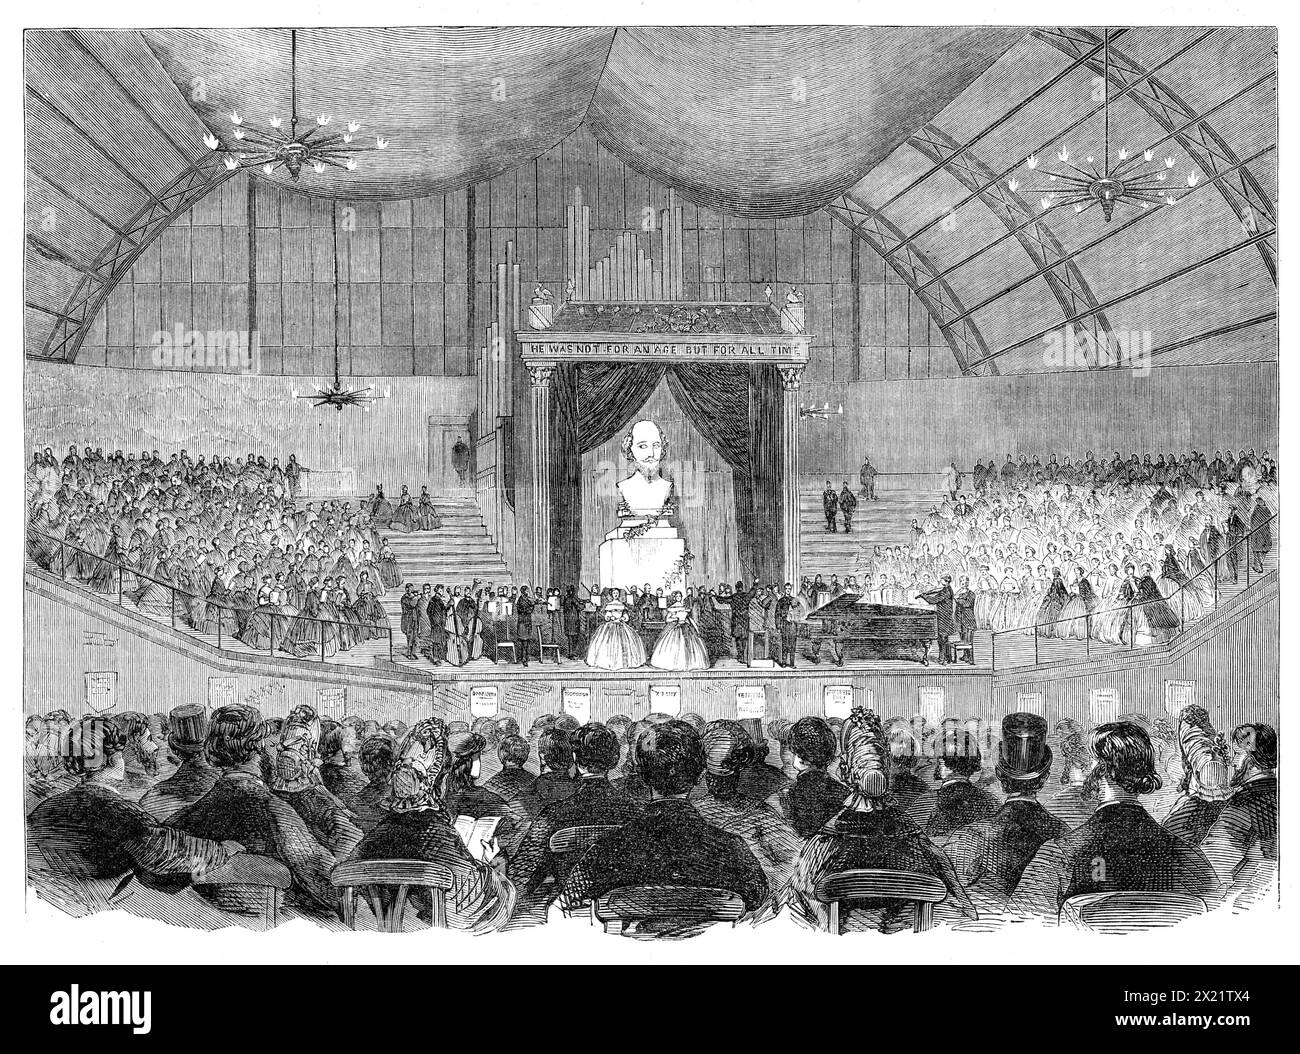 The Shakspeare Commemoration in London: unveiling a bust of Shakspeare at the Agricultural Hall, 1864. View of a ' musical and dramatic fete at the Agricultural Hall, Islington...[There] were dramatic recitals by Mr. Henry Marston, Mr. James Bennett, Mr. J. L. Toole, and Mr. Paul Bedford (by the kind permission of B. Webster, Esq.). At ten o'clock the colossal Tercentenary Bust, modelled for the occasion by Mr. Charles Bacon, was crowned by the people at the hands of Tragedy and Comedy, and the grand chorale &quot;England's Minstrel King&quot; was sung by a monster choir...The hall was decorat Stock Photo